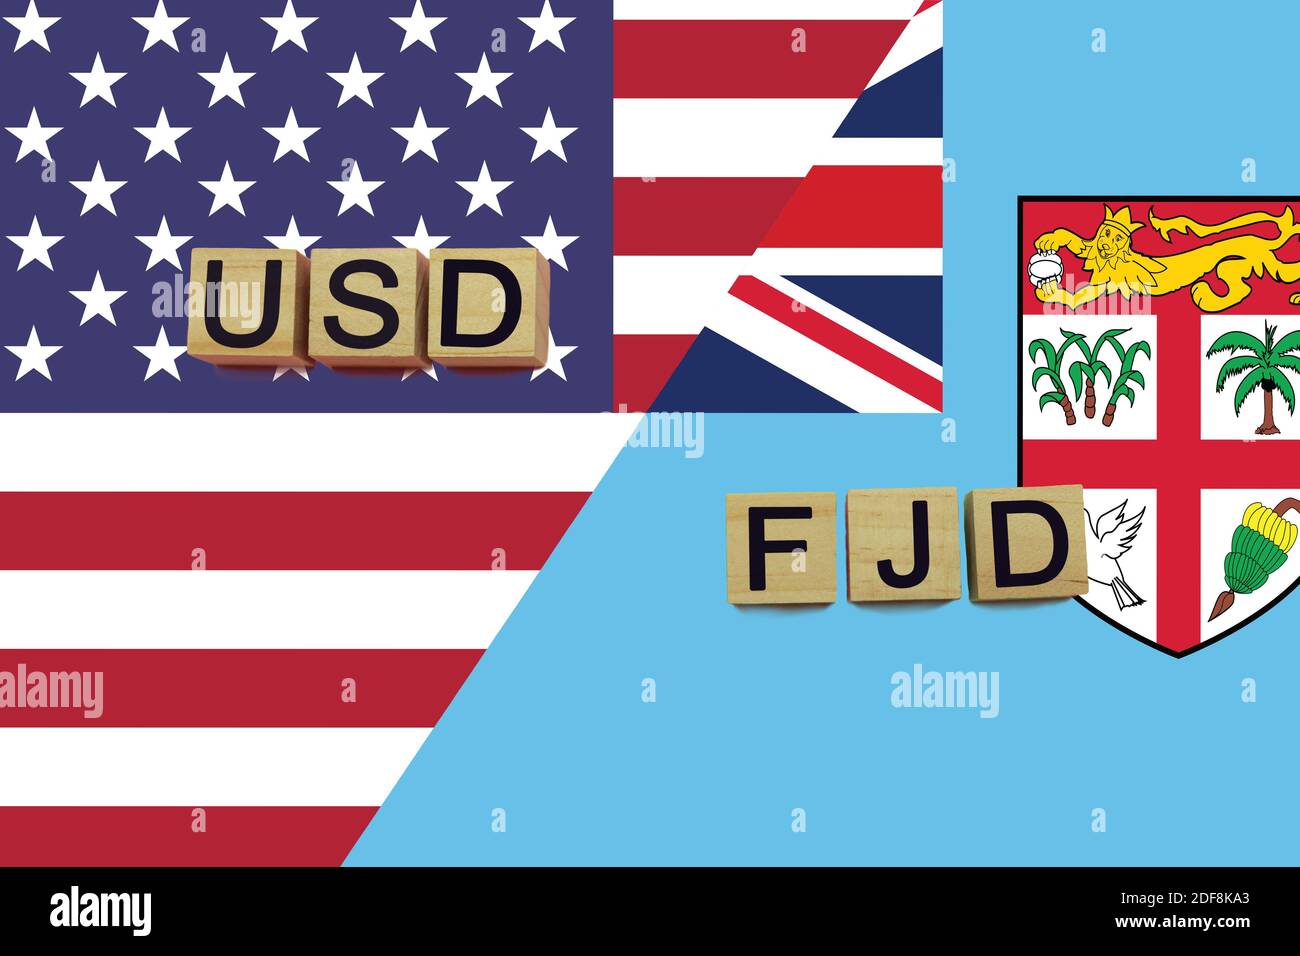 USA and Fiji currencies codes on national flags background. International money transfer concept Stock Photo